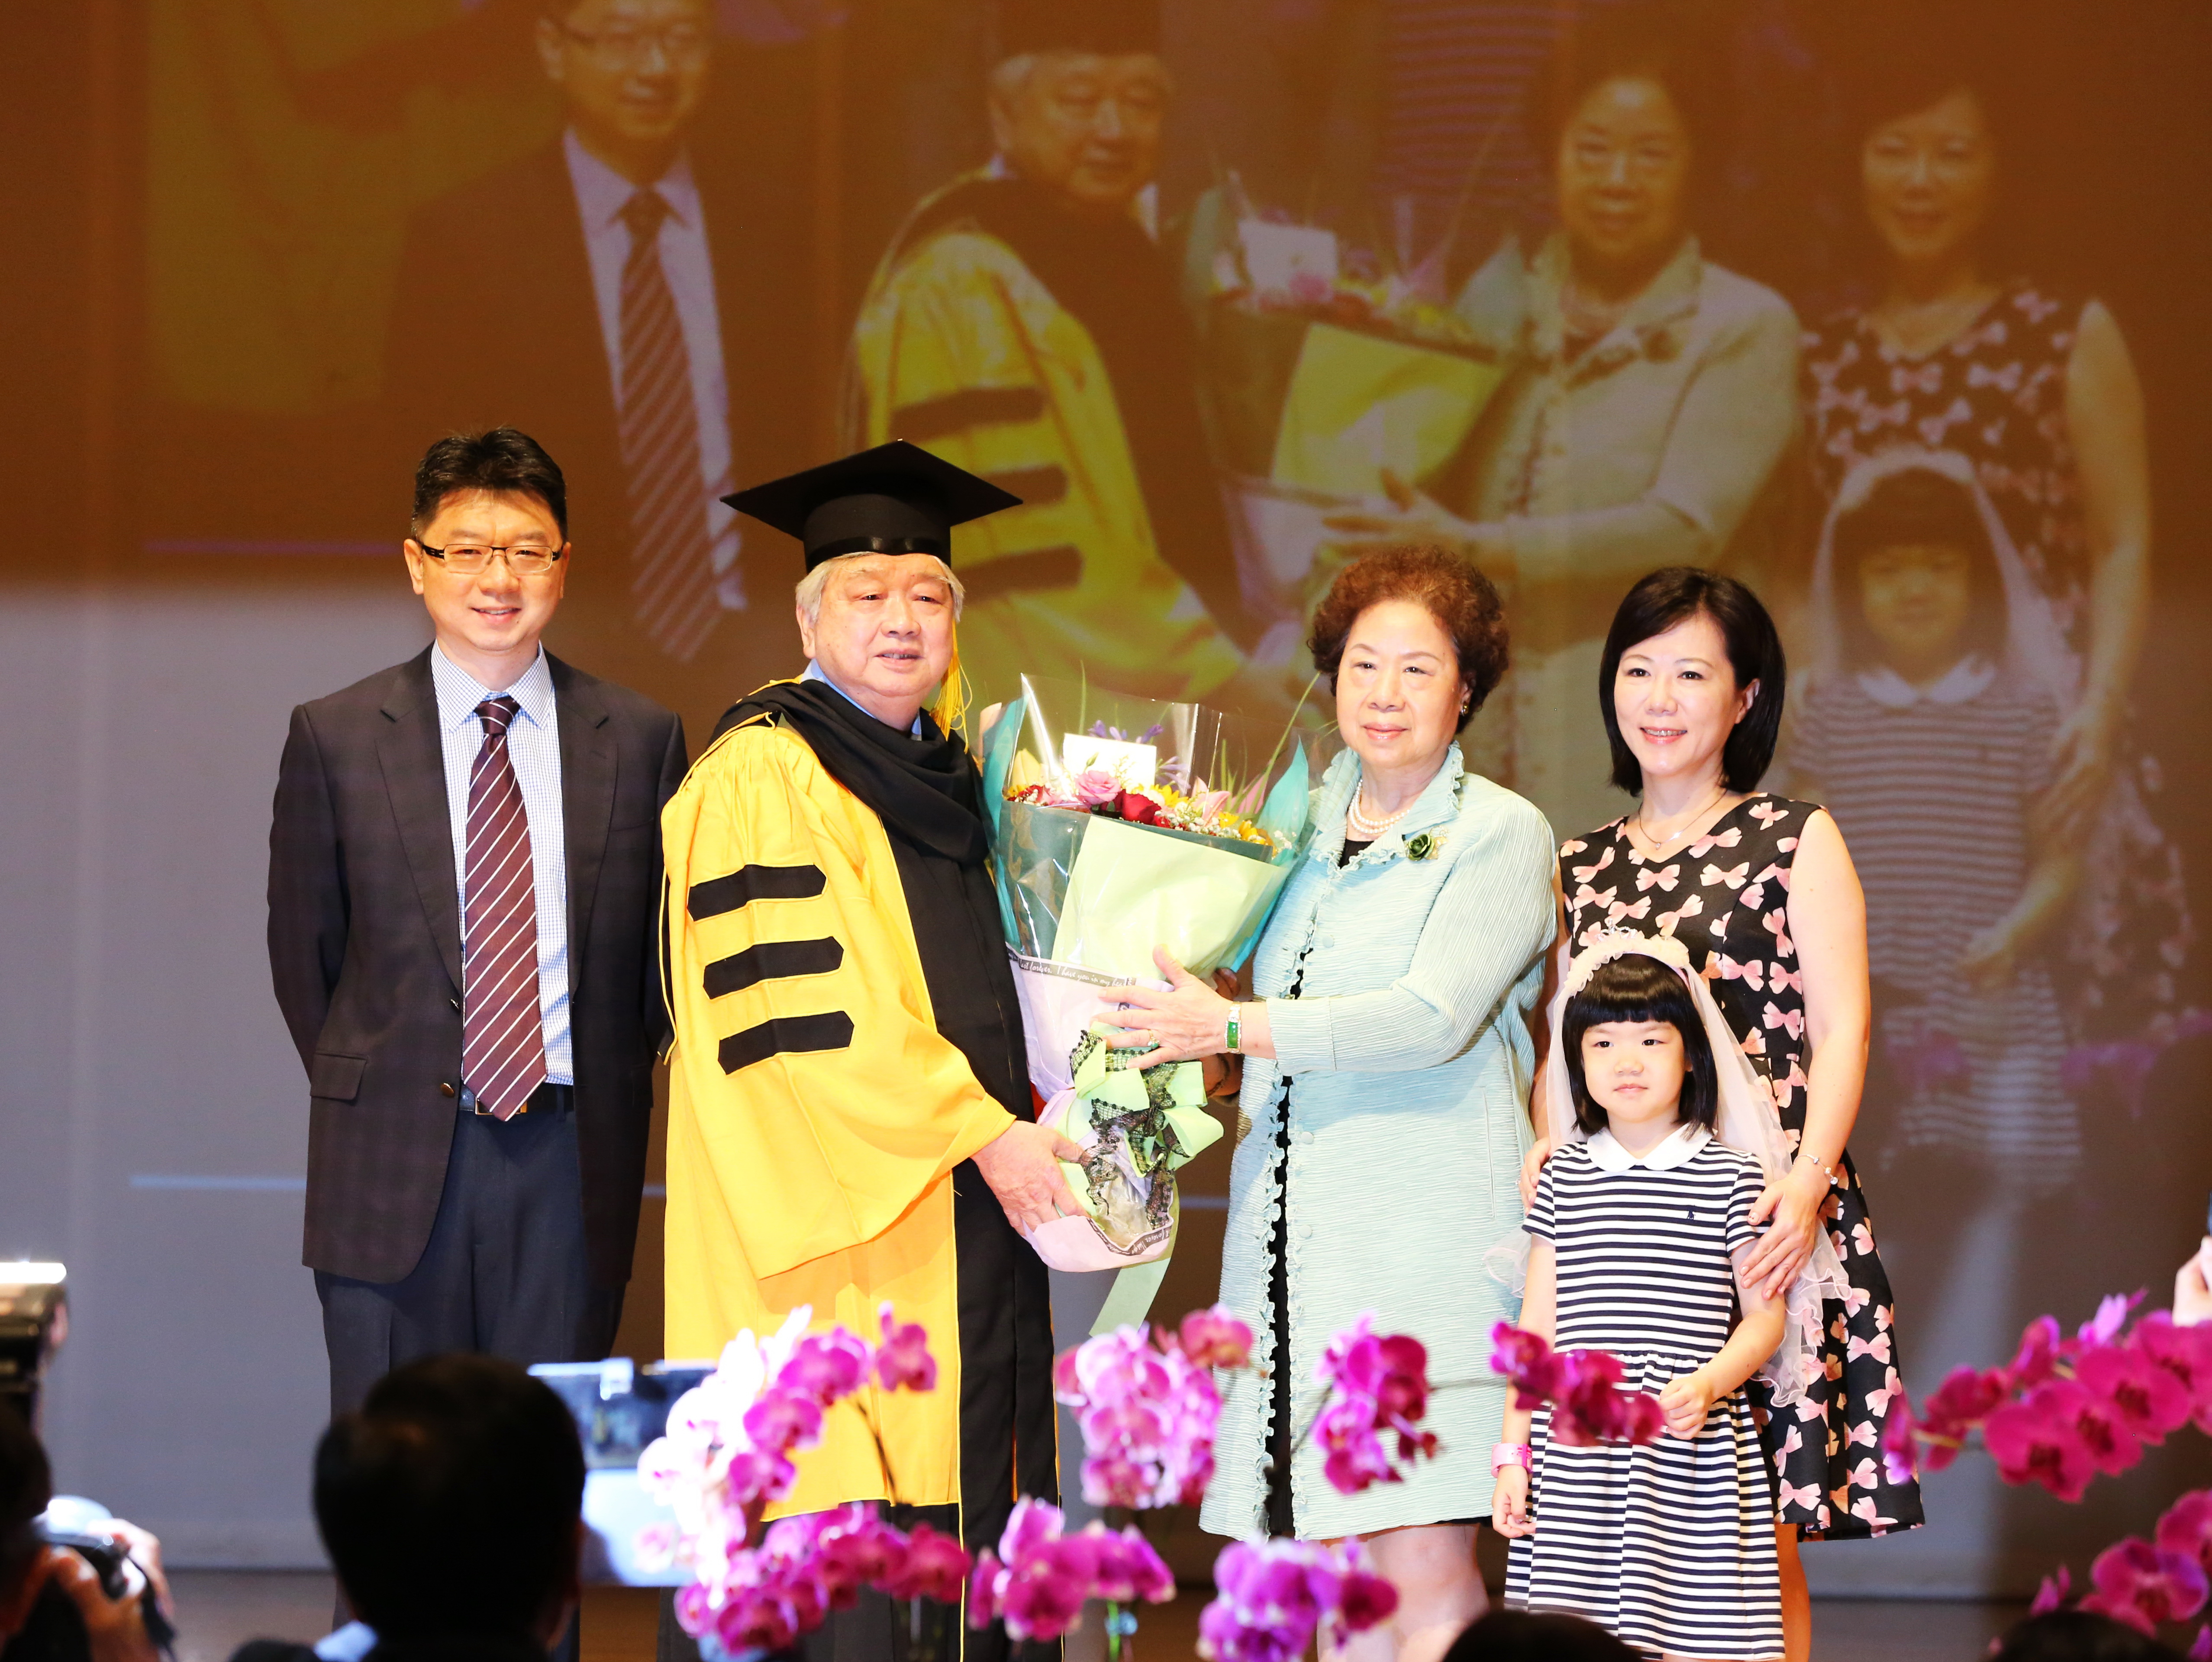 A photo of Dr. Chairman Lin Guo-Cun, who was awarded an honorary doctorate by NCYU, and his family members.